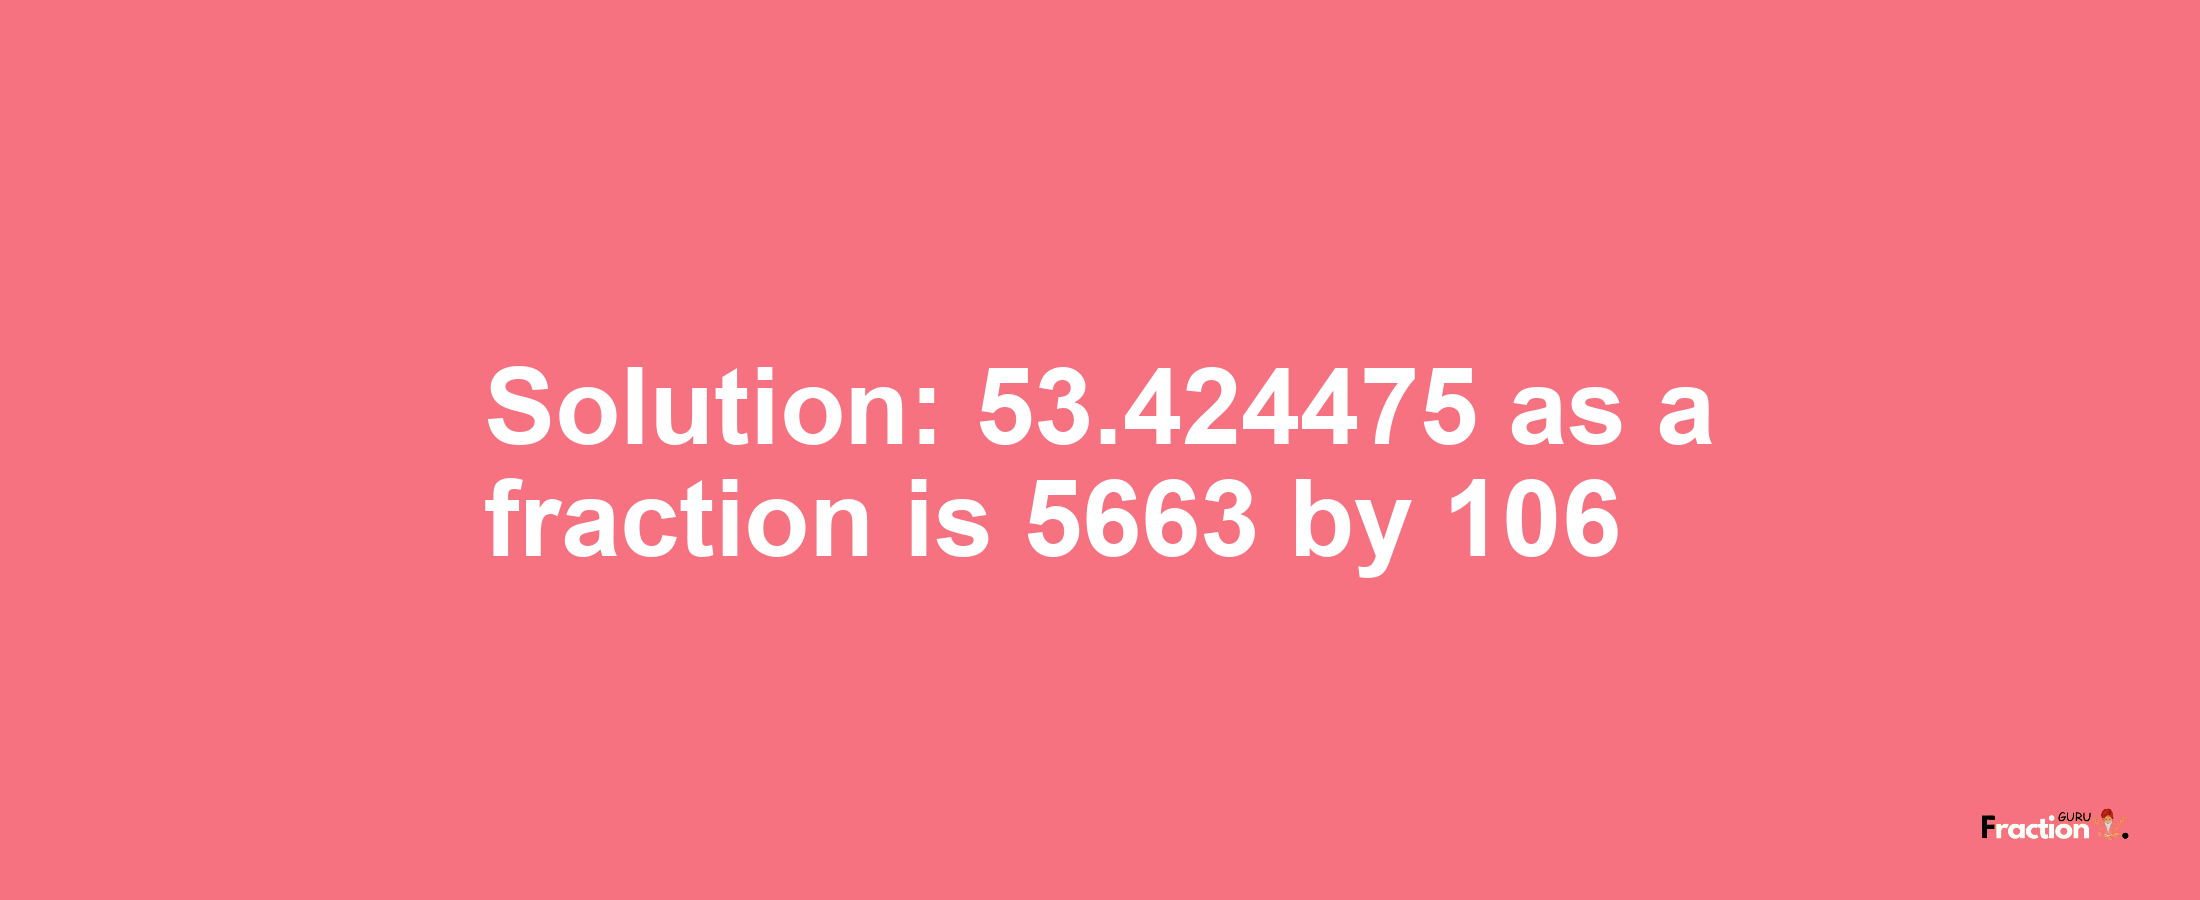 Solution:53.424475 as a fraction is 5663/106